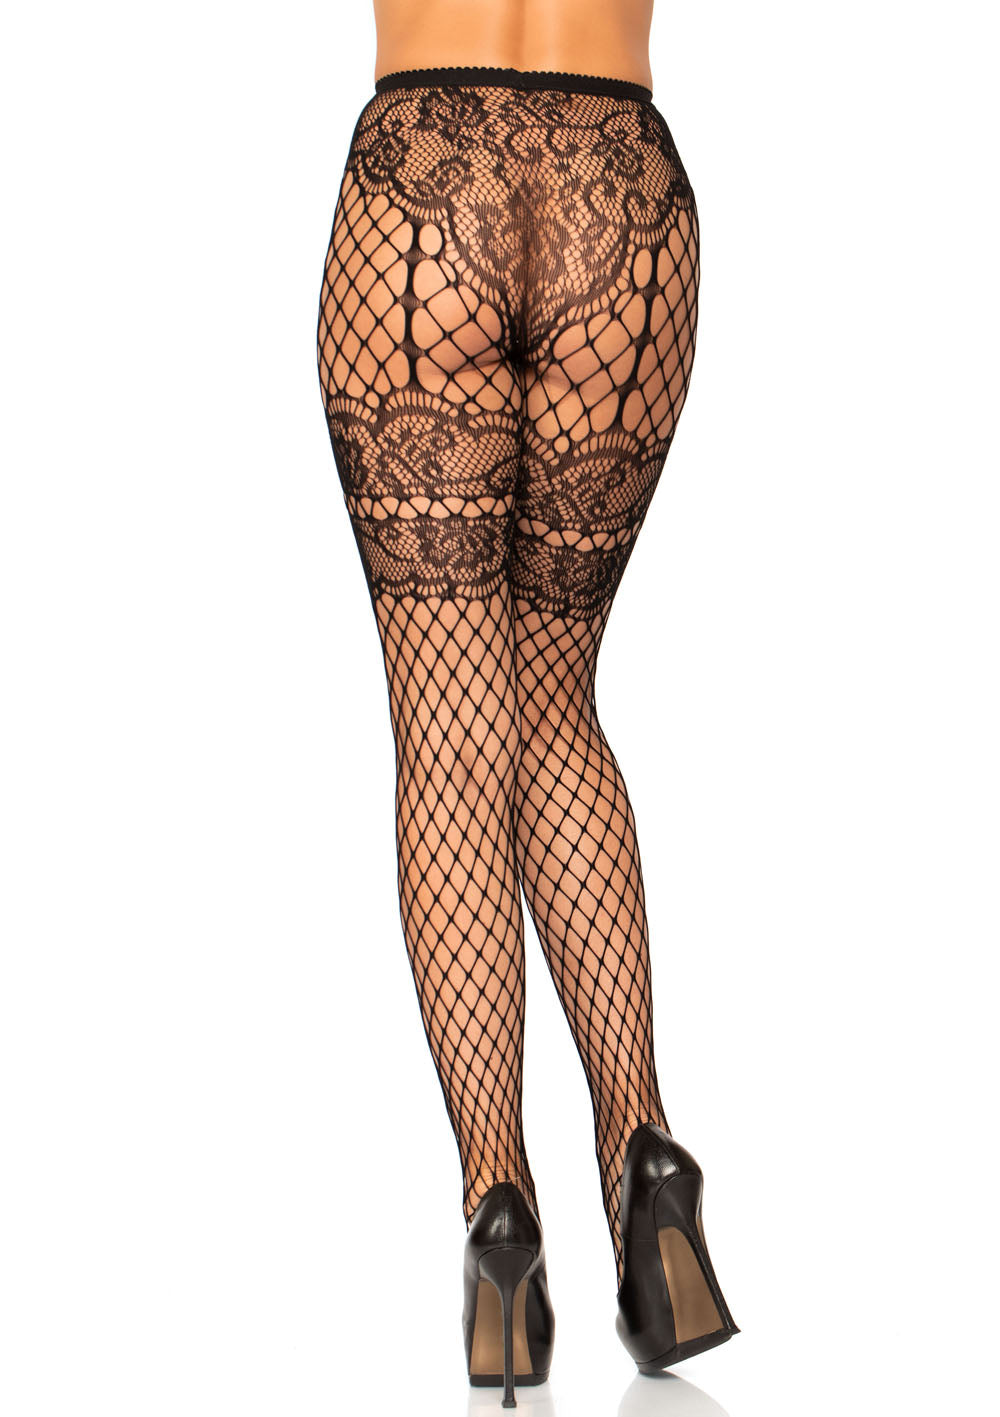 Lace French Cut Faux Garter Net Tights - One Size  Black